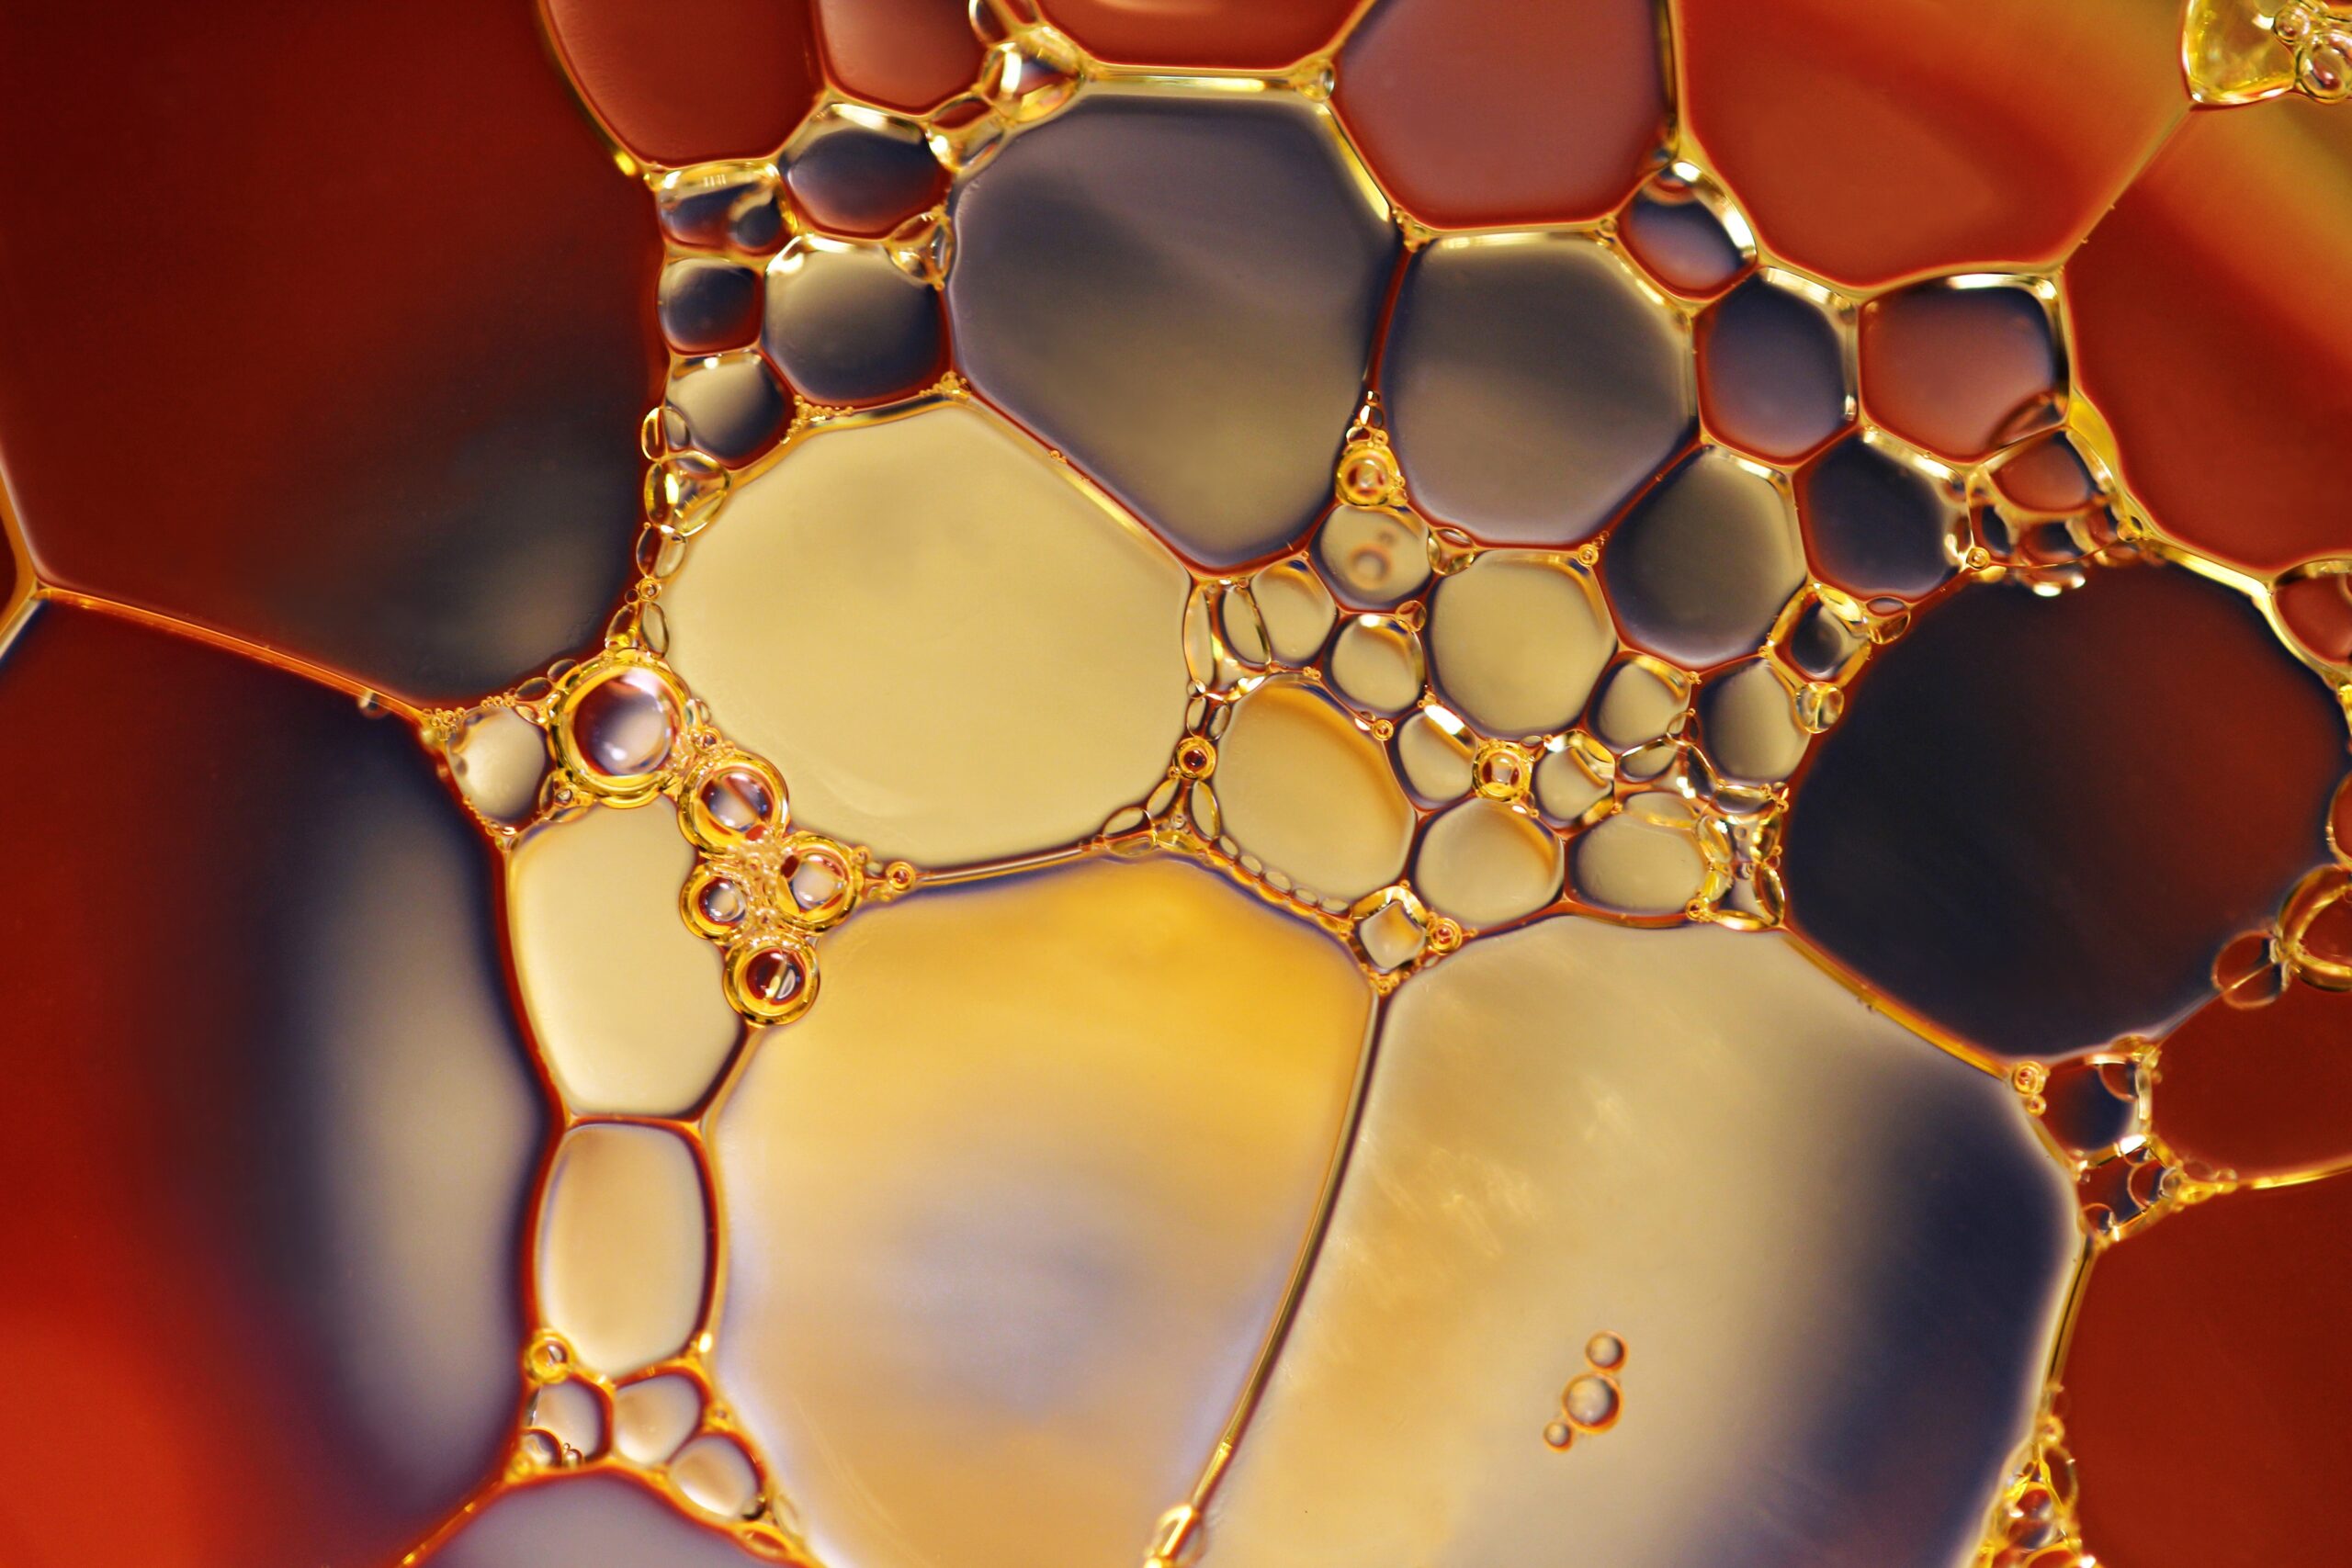 A close-up of very bubbly oil